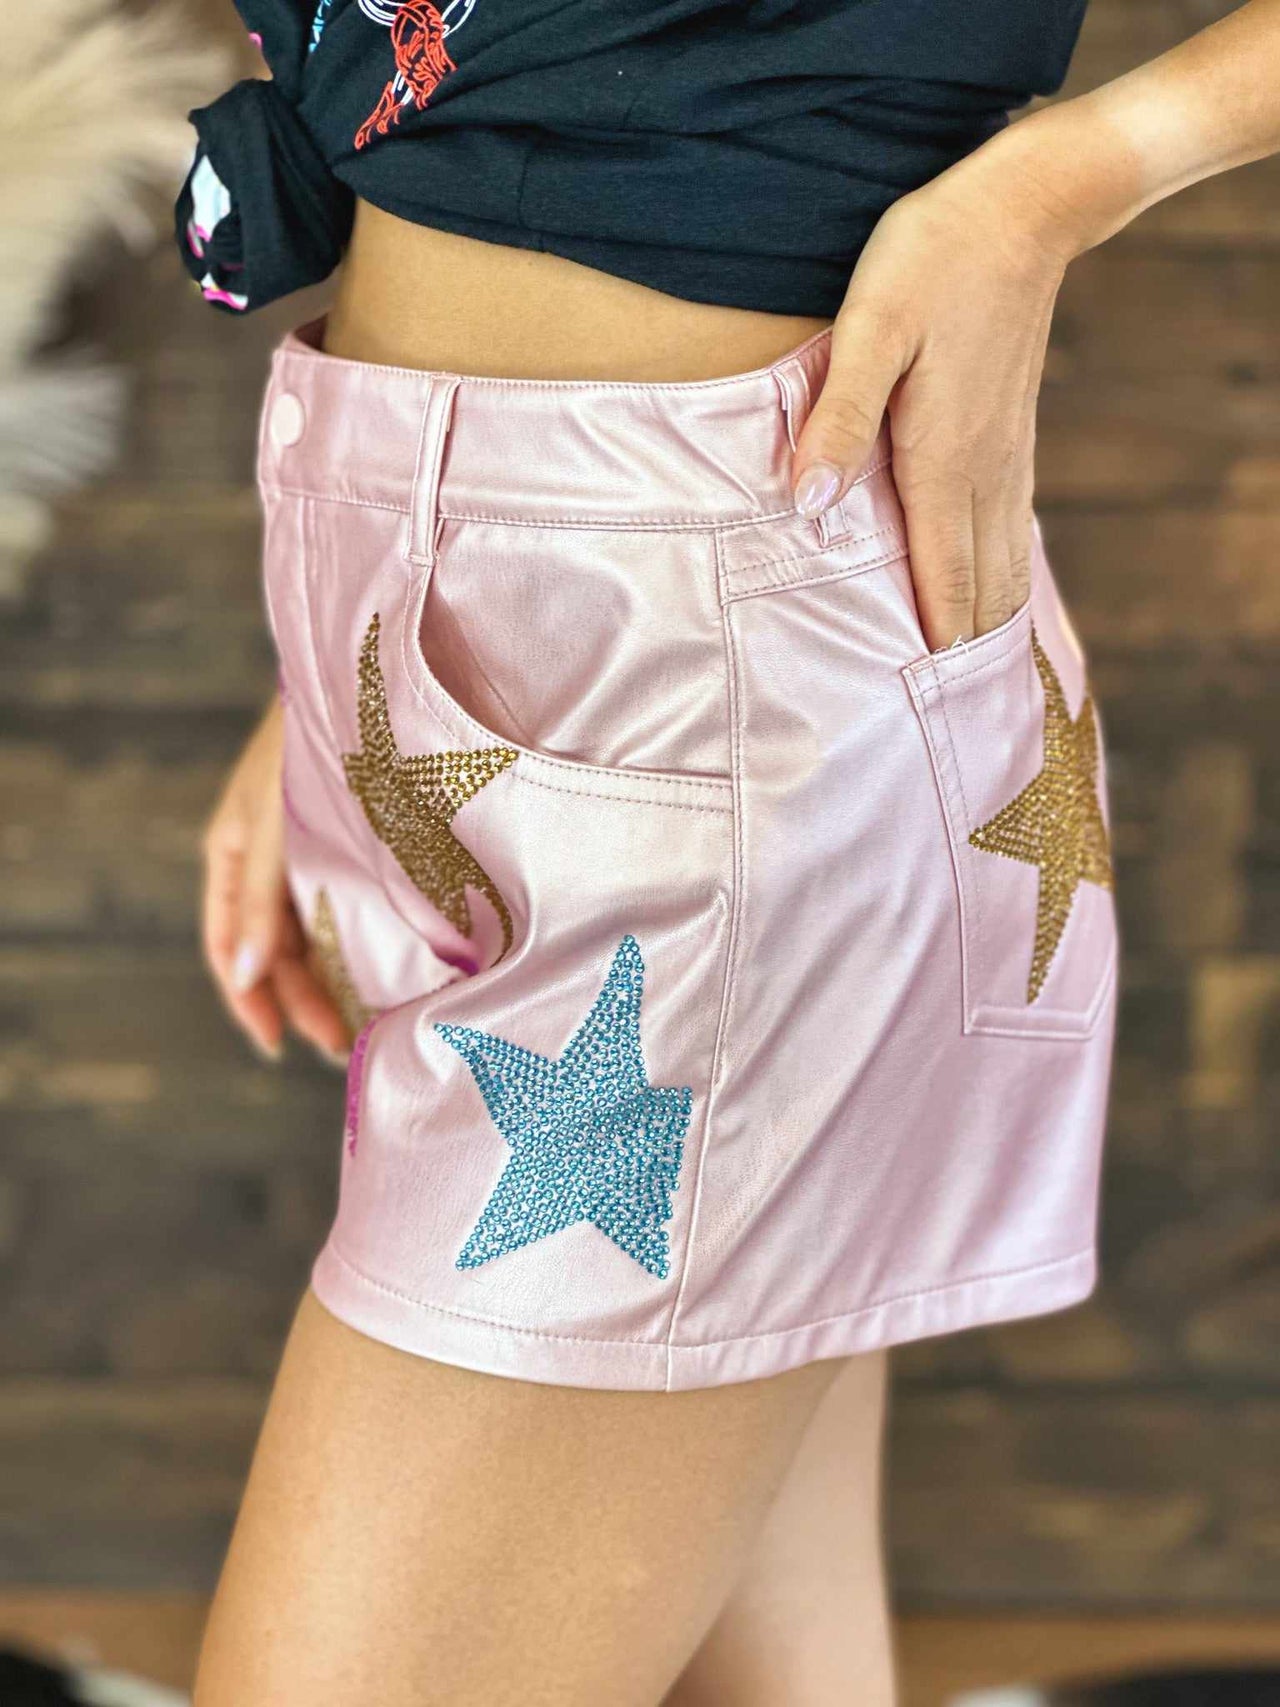 LIght pink metallic leather shorts with stars.